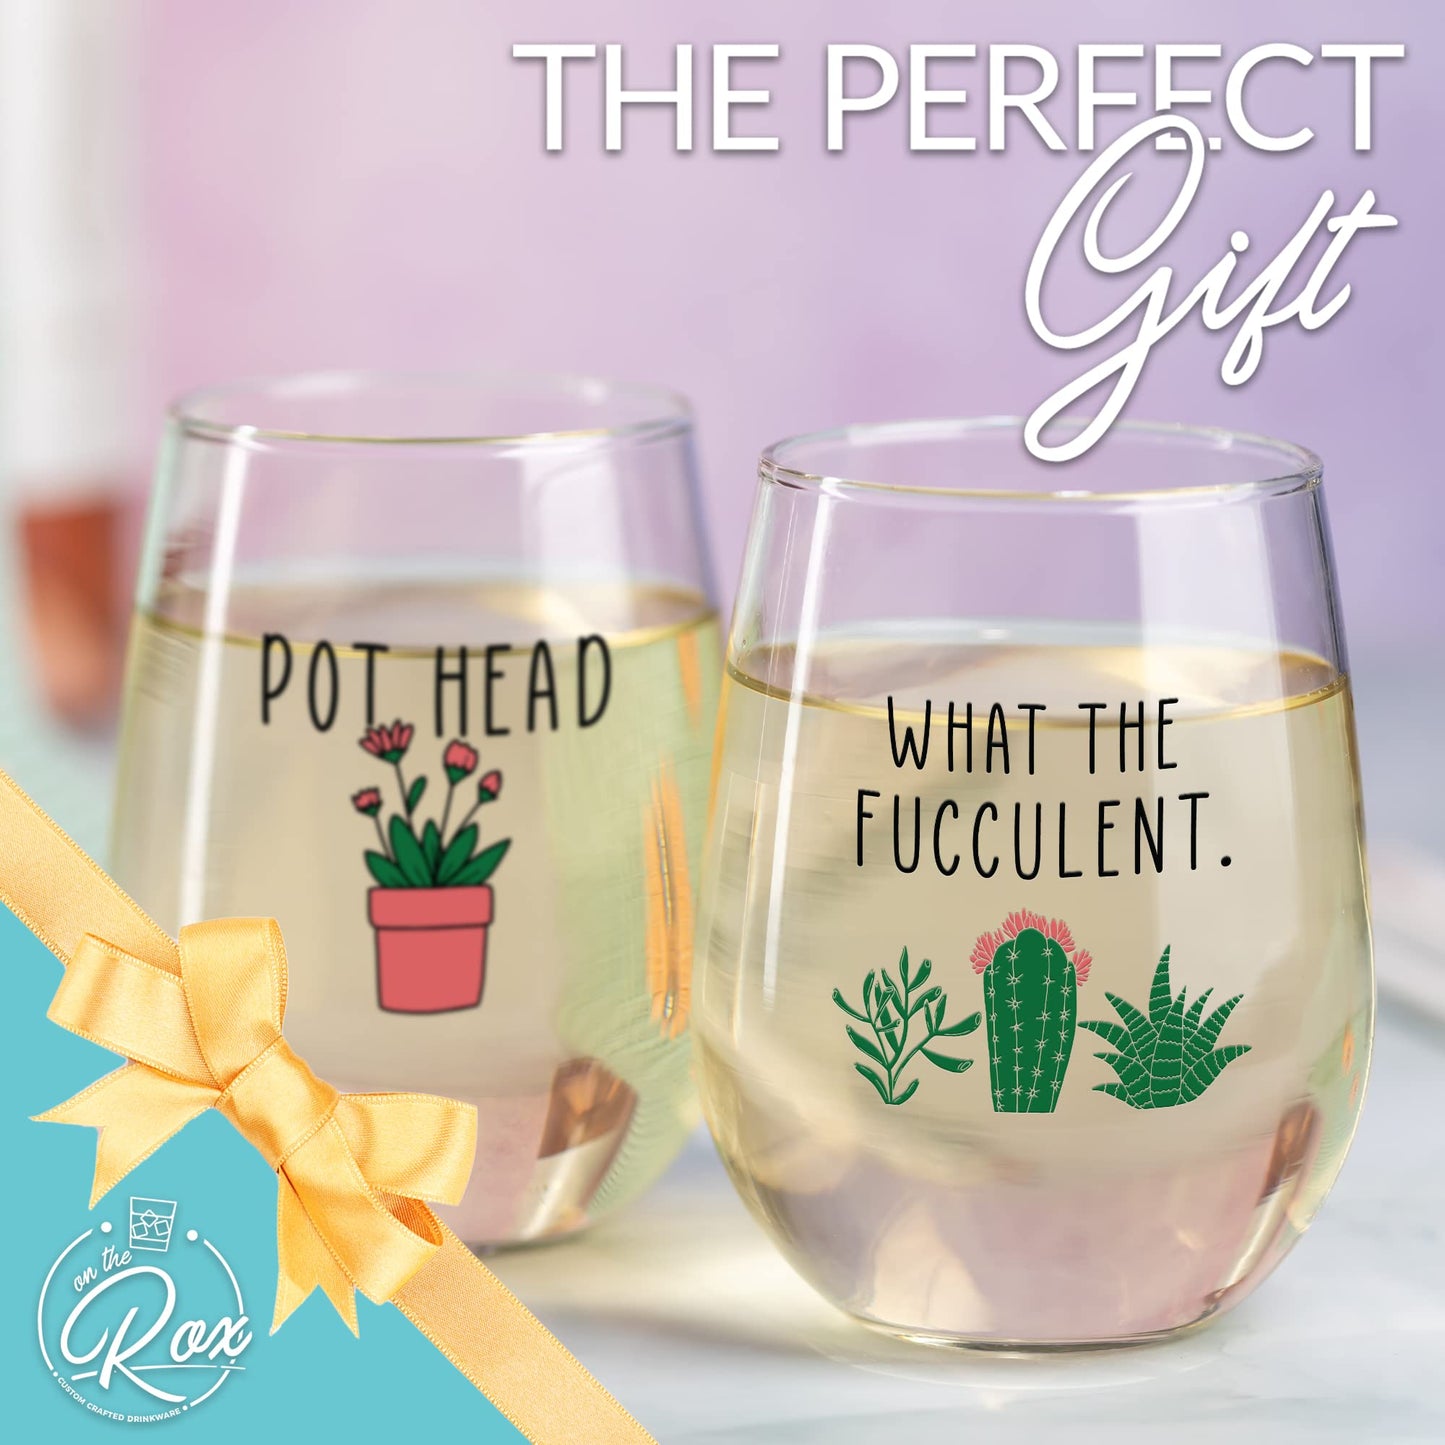 Succulent Plant Cactus Gifts for Women- Set of 2 Funny Wine Glasses 15oz - Plant Lover Gift Mug - What the Fucculent- Pot Head